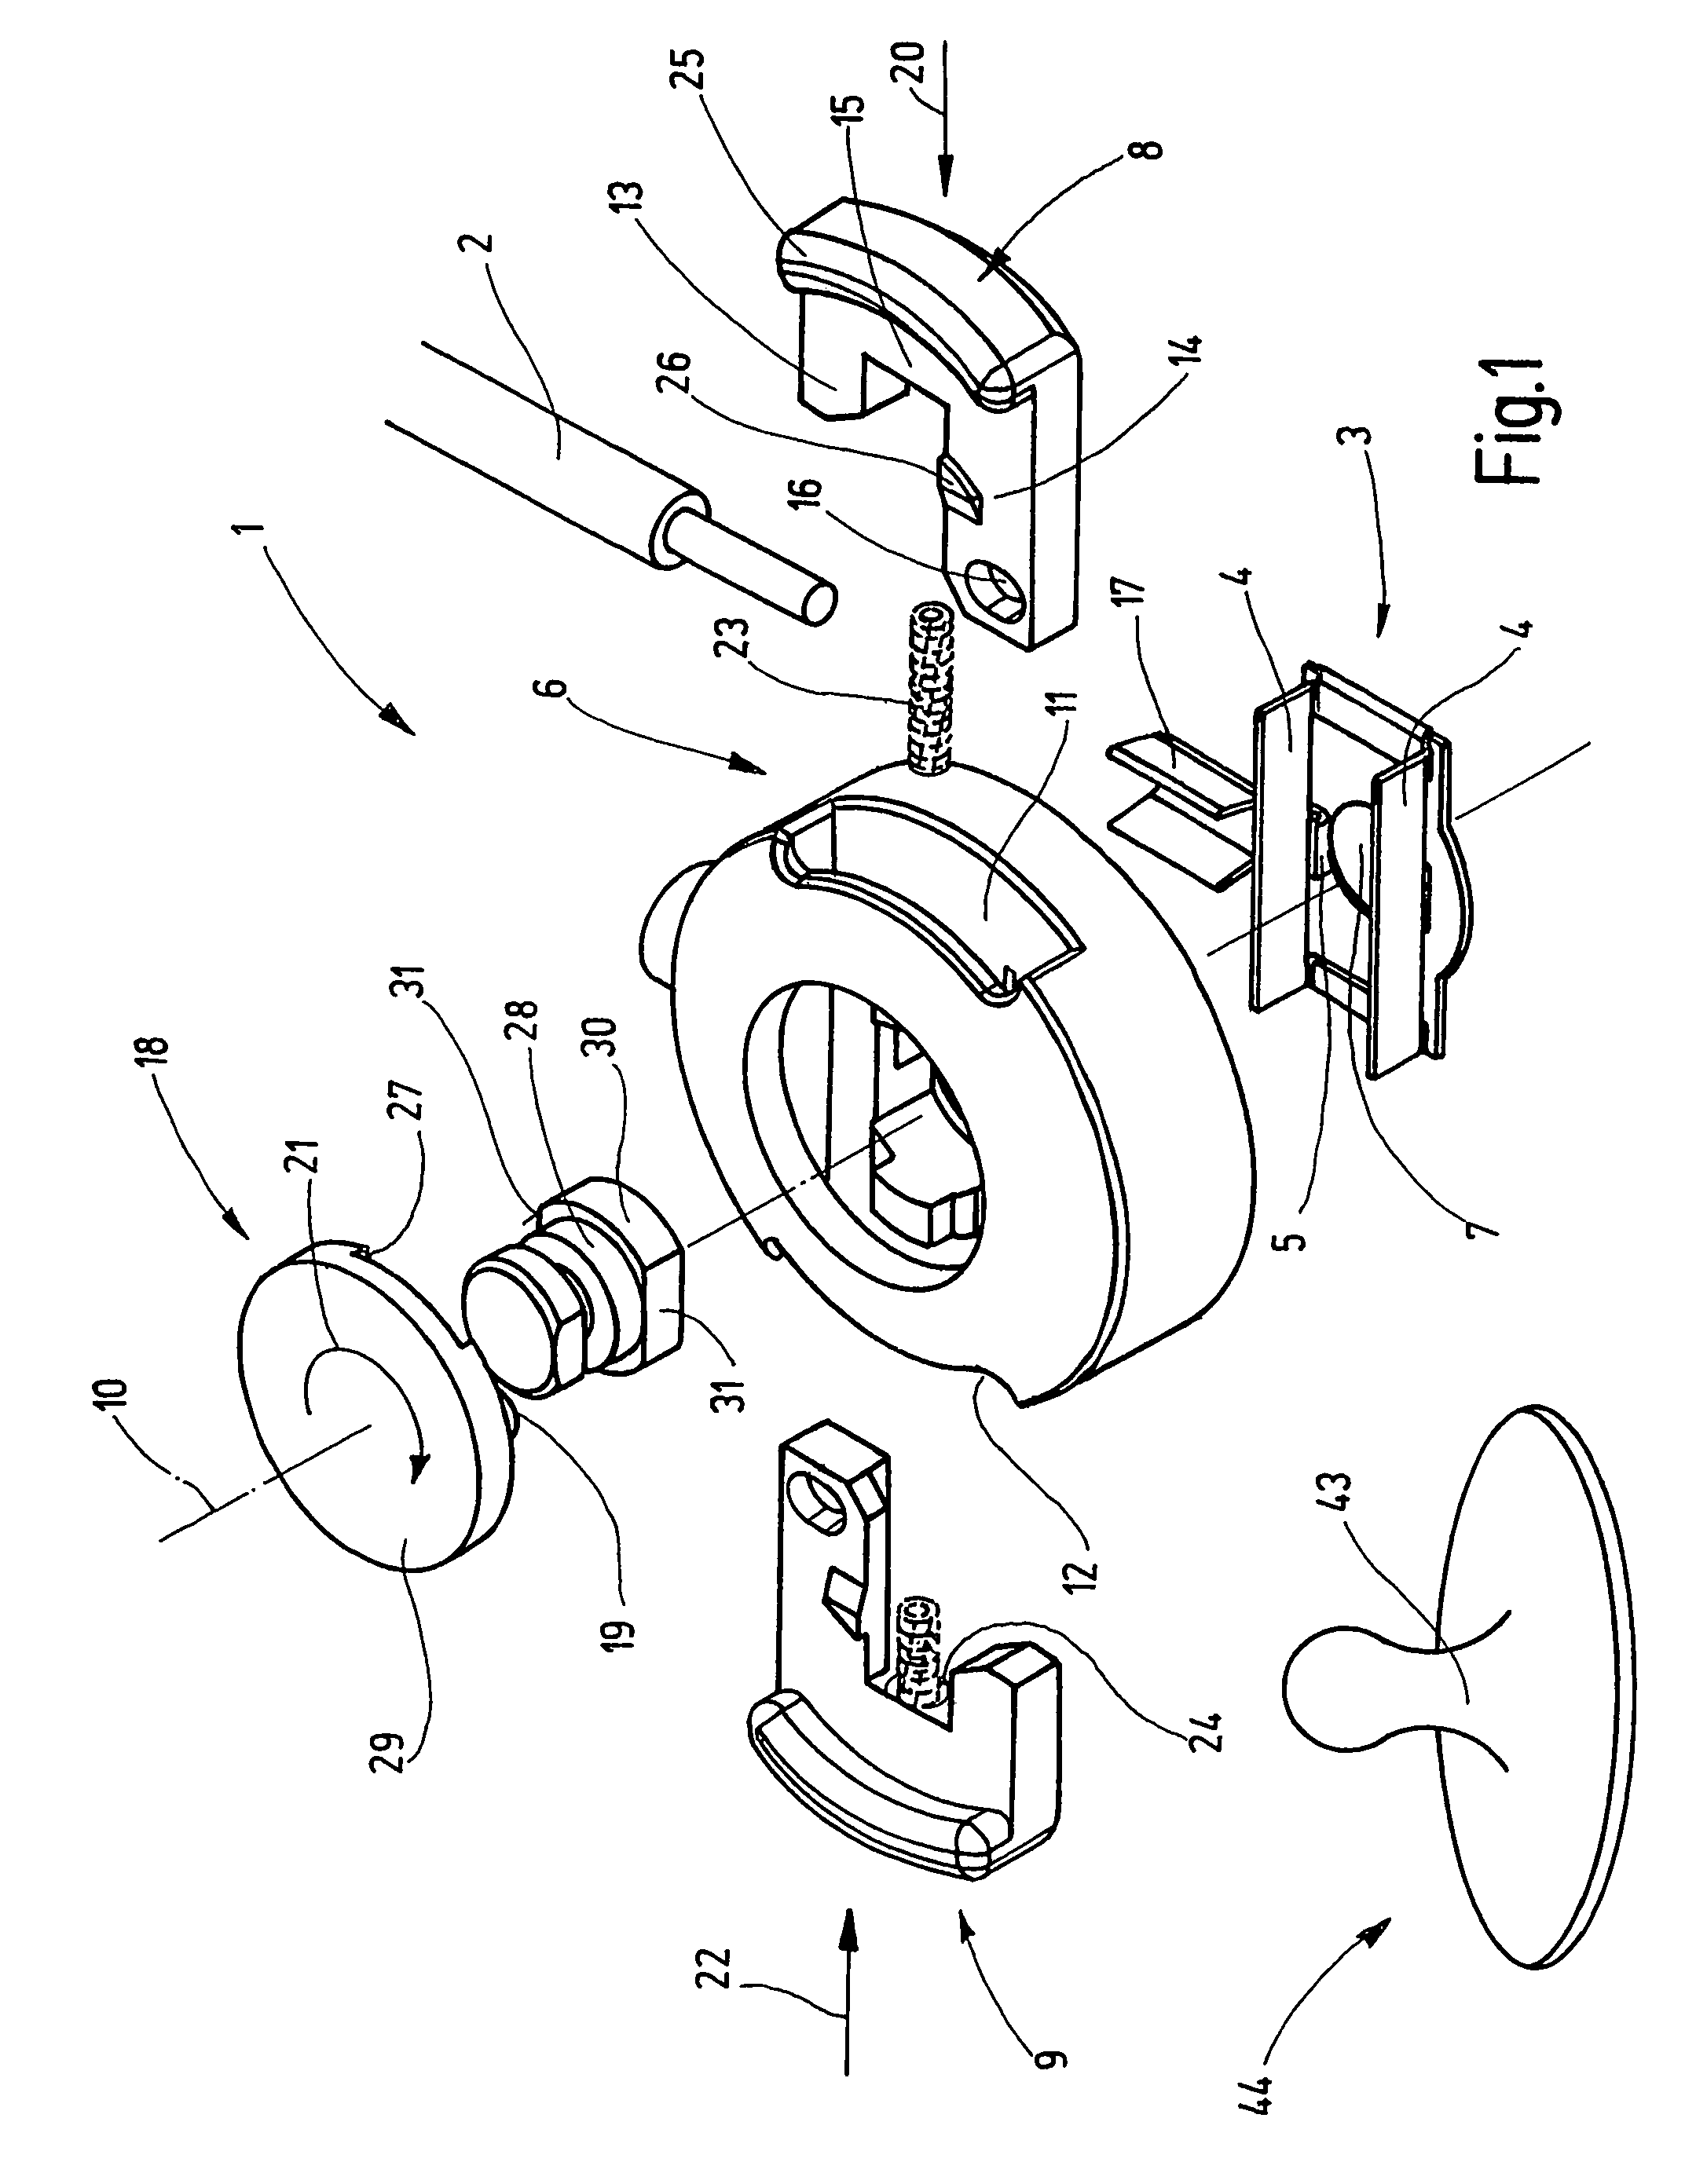 Electrical device connecting a line to an electrode